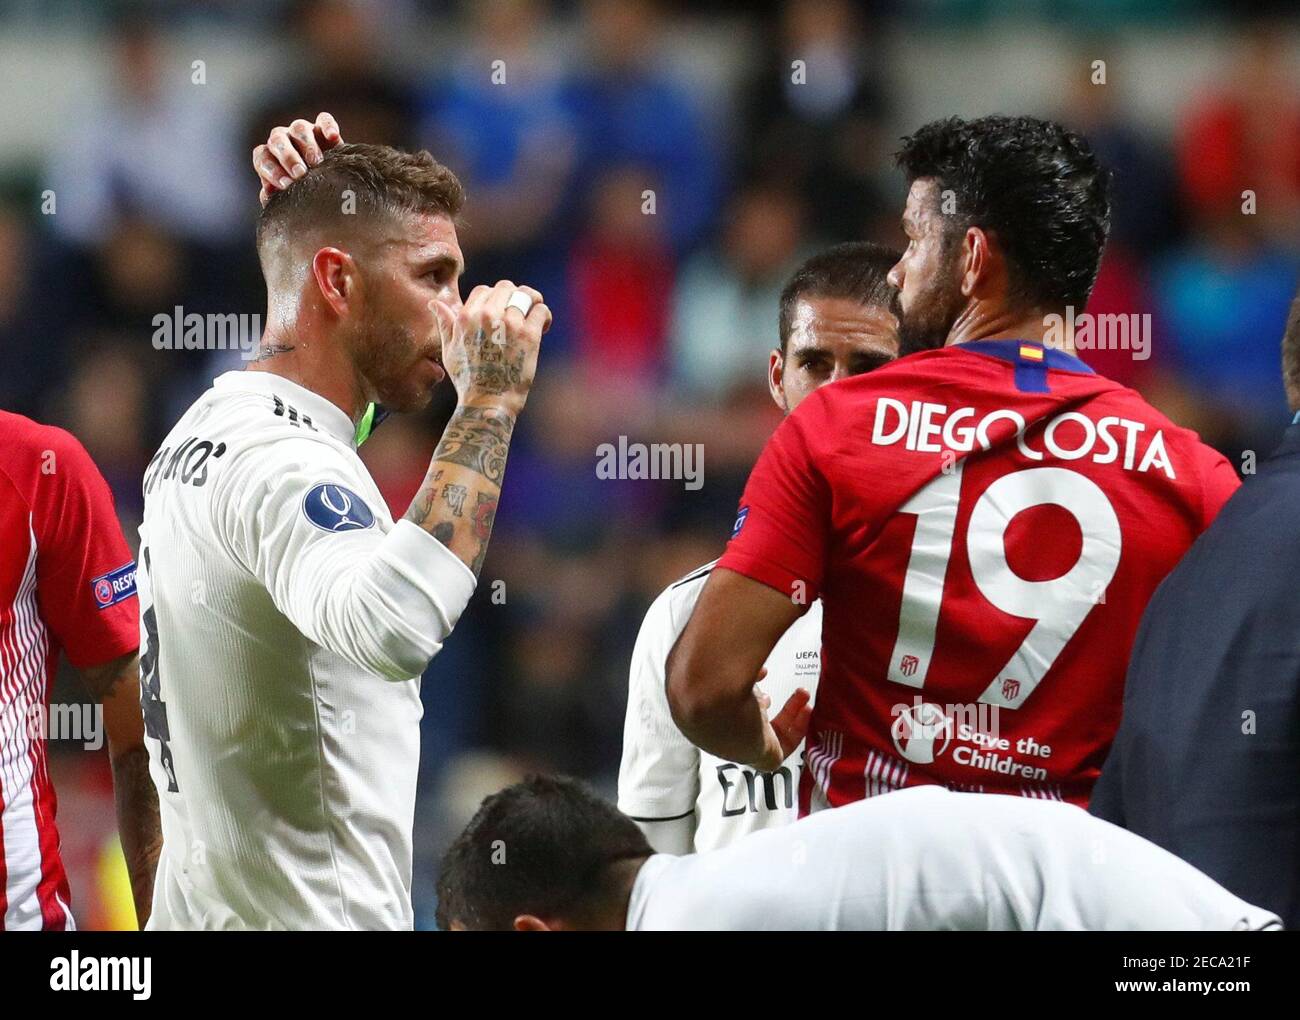 TALLINN, ESTONIA - AUGUST 15: Diego Costa of Atletico Madrid in action  during the UEFA Super Cup match between Real Madrid and Atletico Madrid at  A Le Coq Arena on August 15, 2018 in Tallinn, Estonia. (MB Media Stock  Photo - Alamy